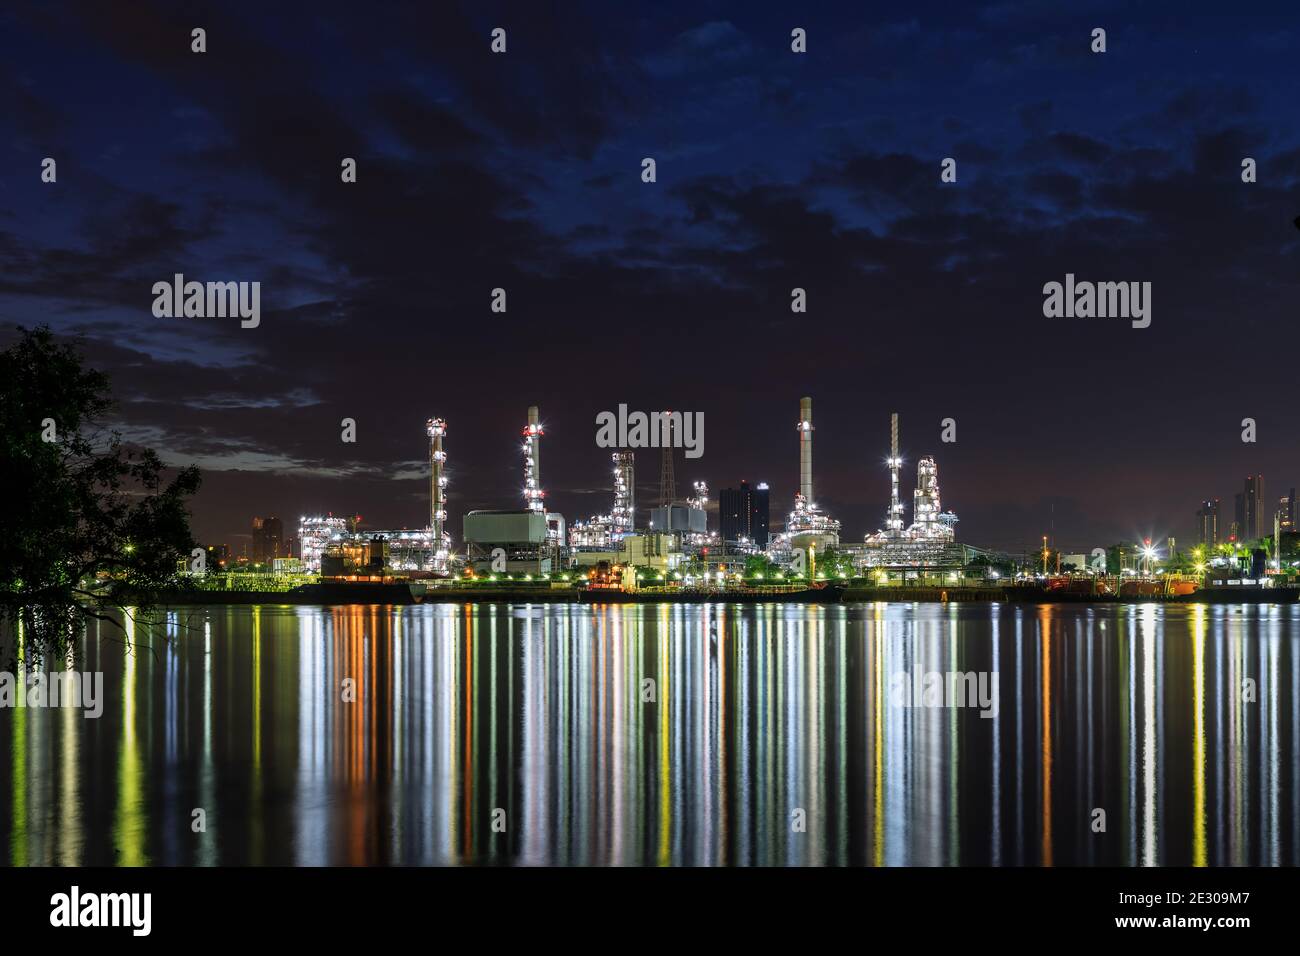 Oil and gas refinery plant factory with refection on river at night twilight. petrochemical and energy industry concept. Stock Photo